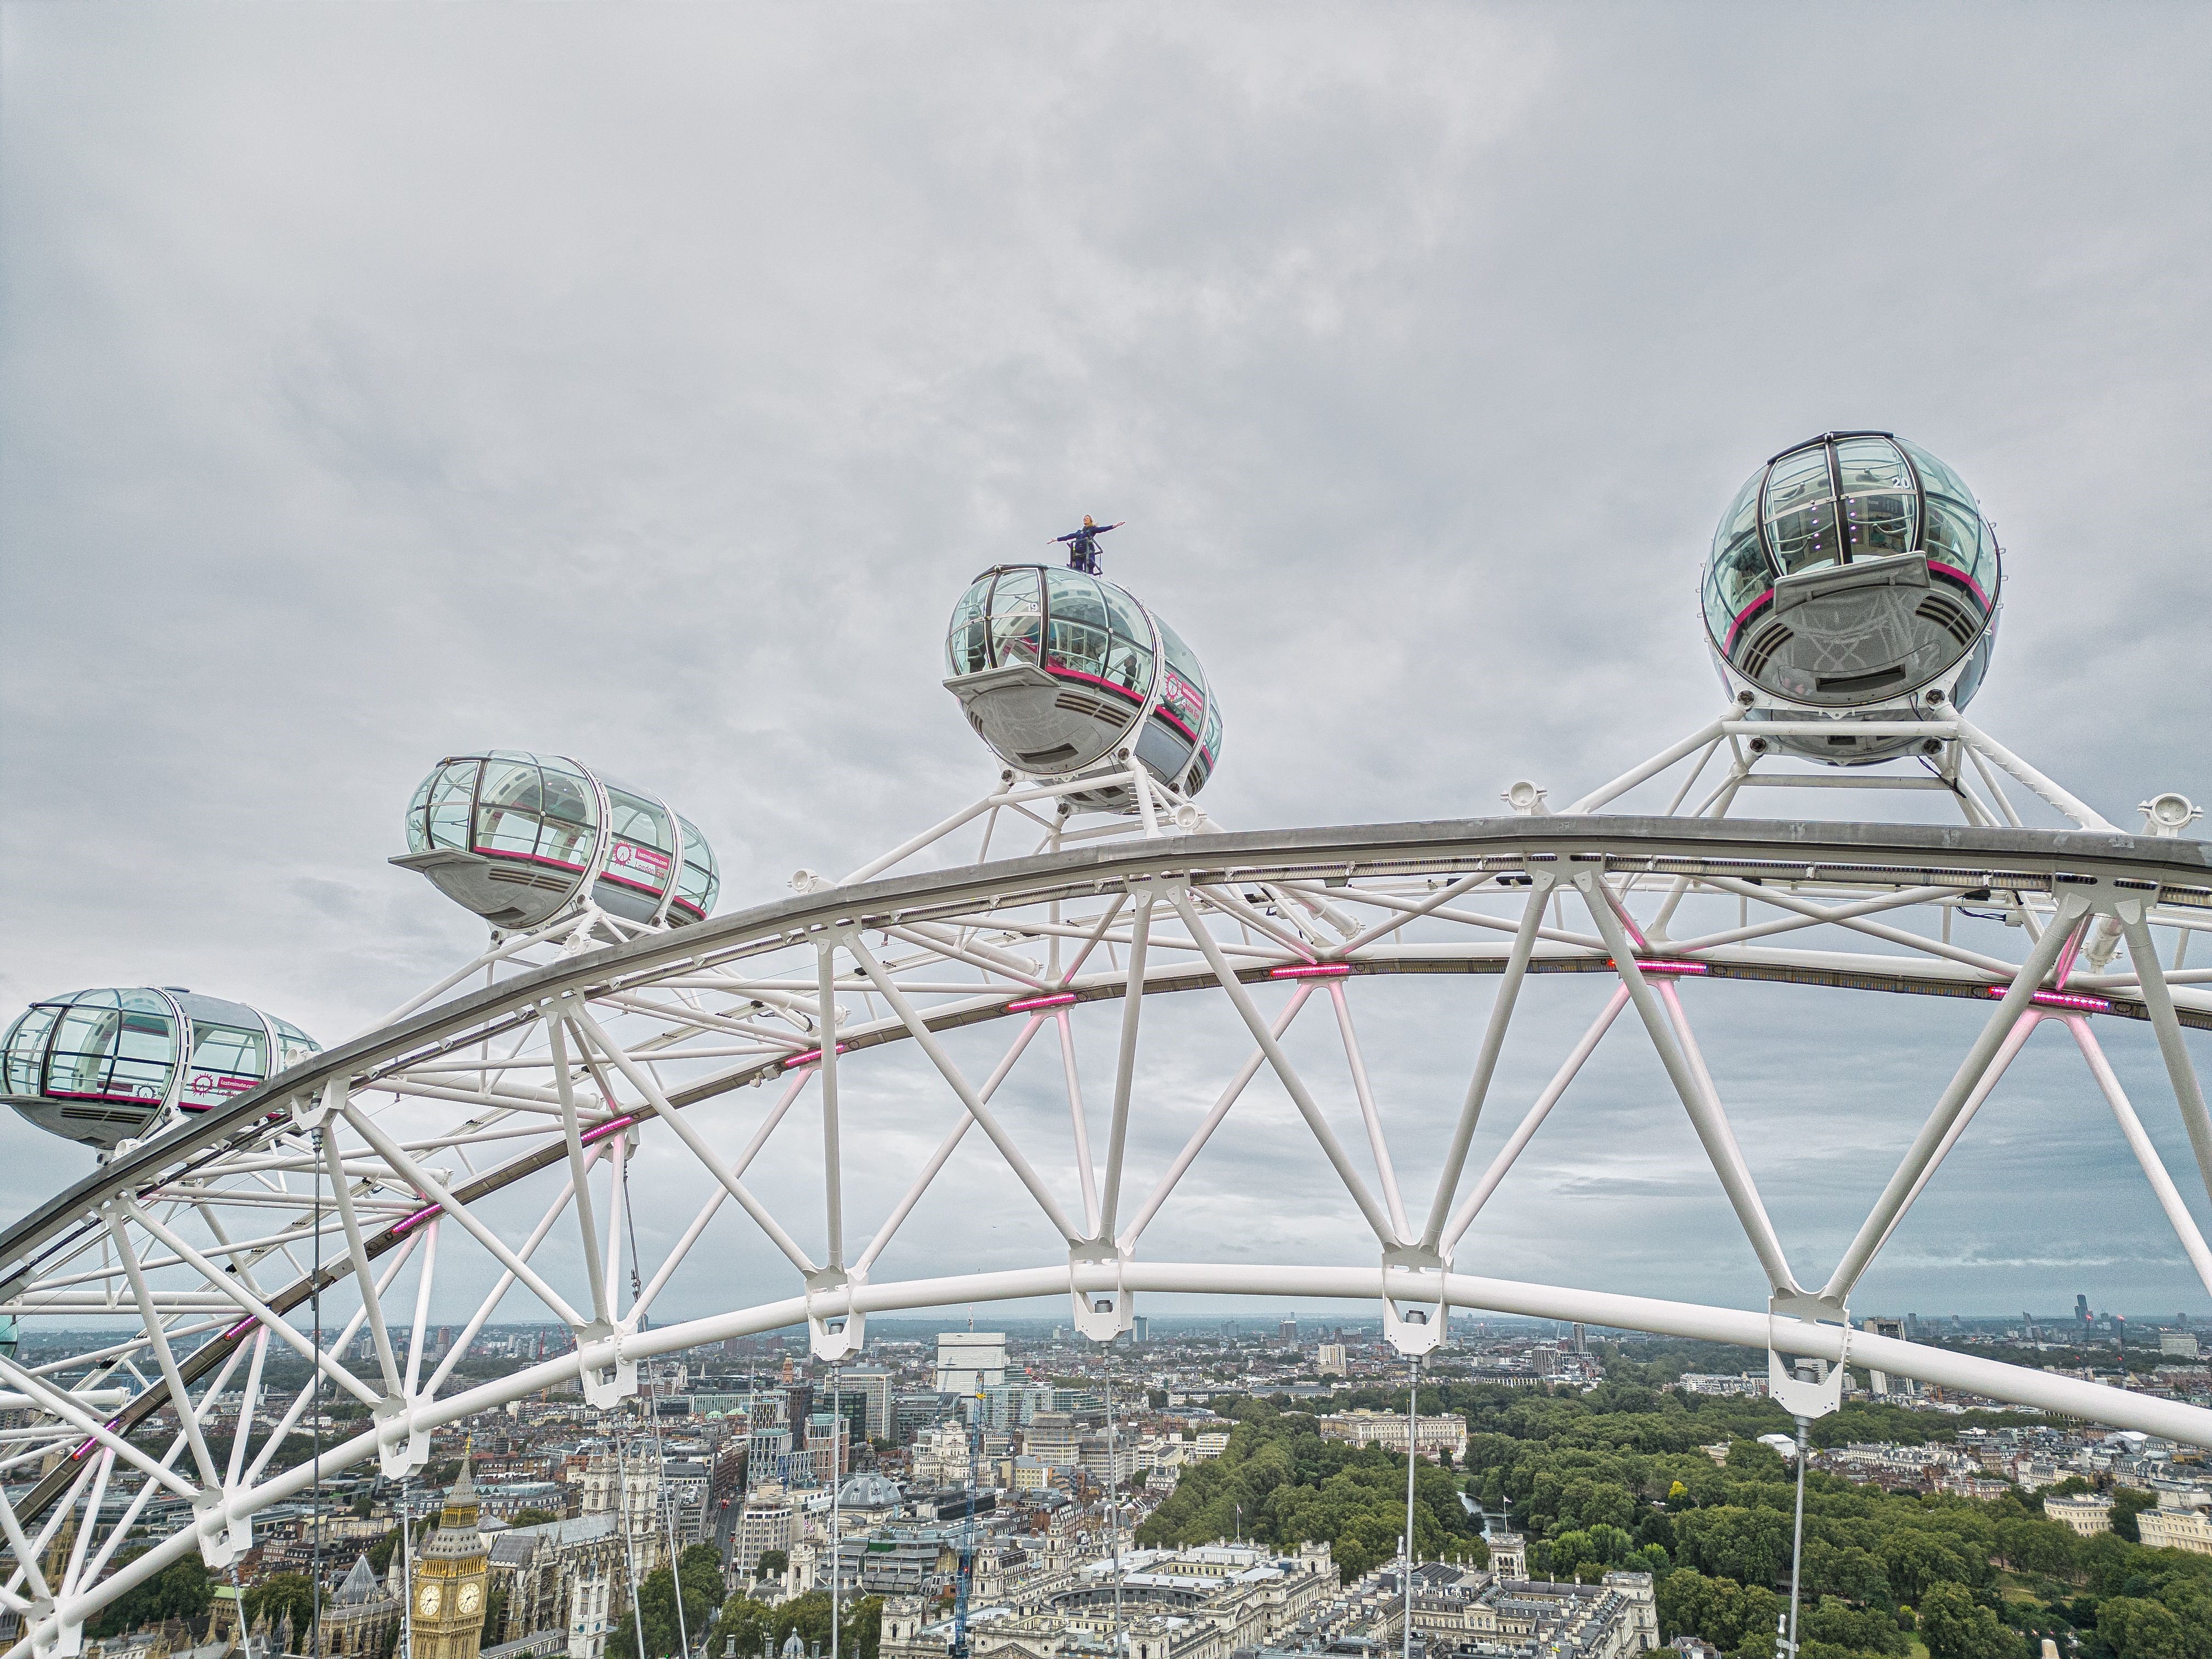 Sally Williams harnessed 135m (443ft) high on top of the London Eye for 20 minutes at 7 am presenting the weather forecast